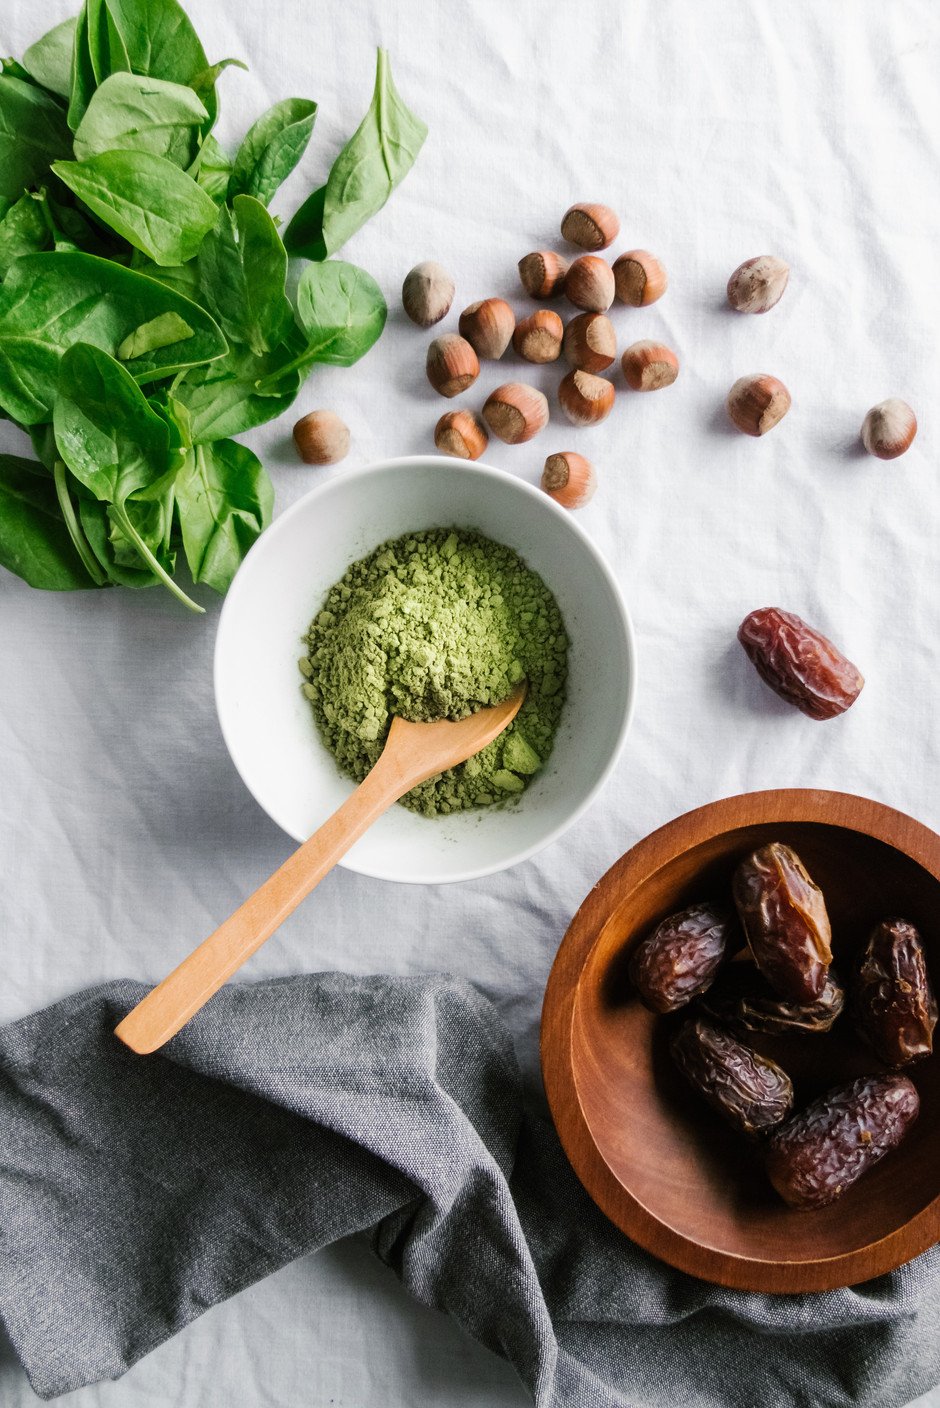 overhead of matcha tea with a wood spoon and a bowl of dates, spinach and hazelnuts on a white surface.